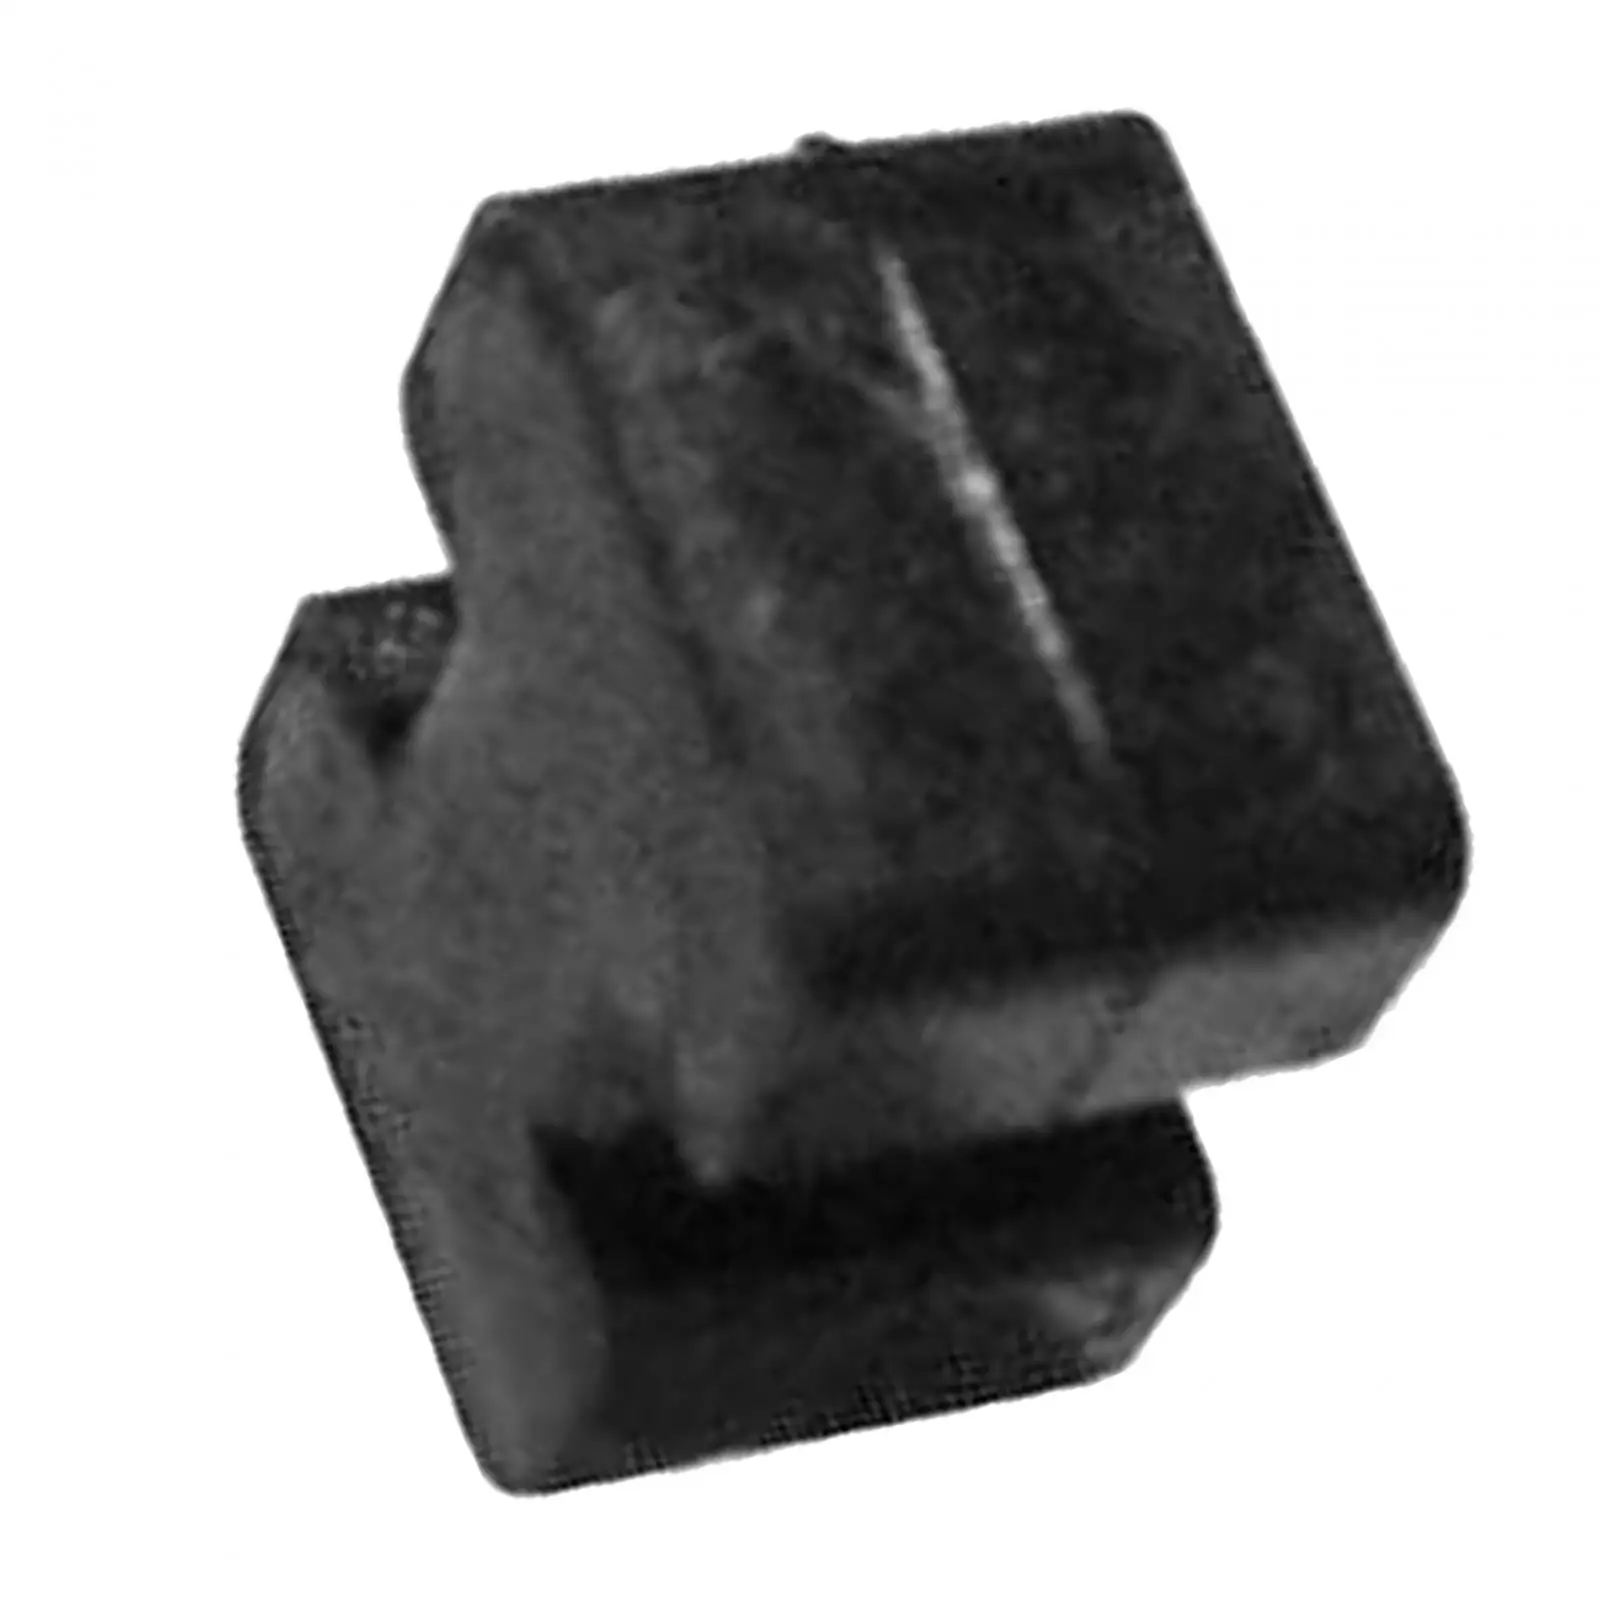 Cable 2 Protect Part 703-48358-00-00 Professional Replacement Accessory Anchor for Outboard Remote Controller Boat Parts